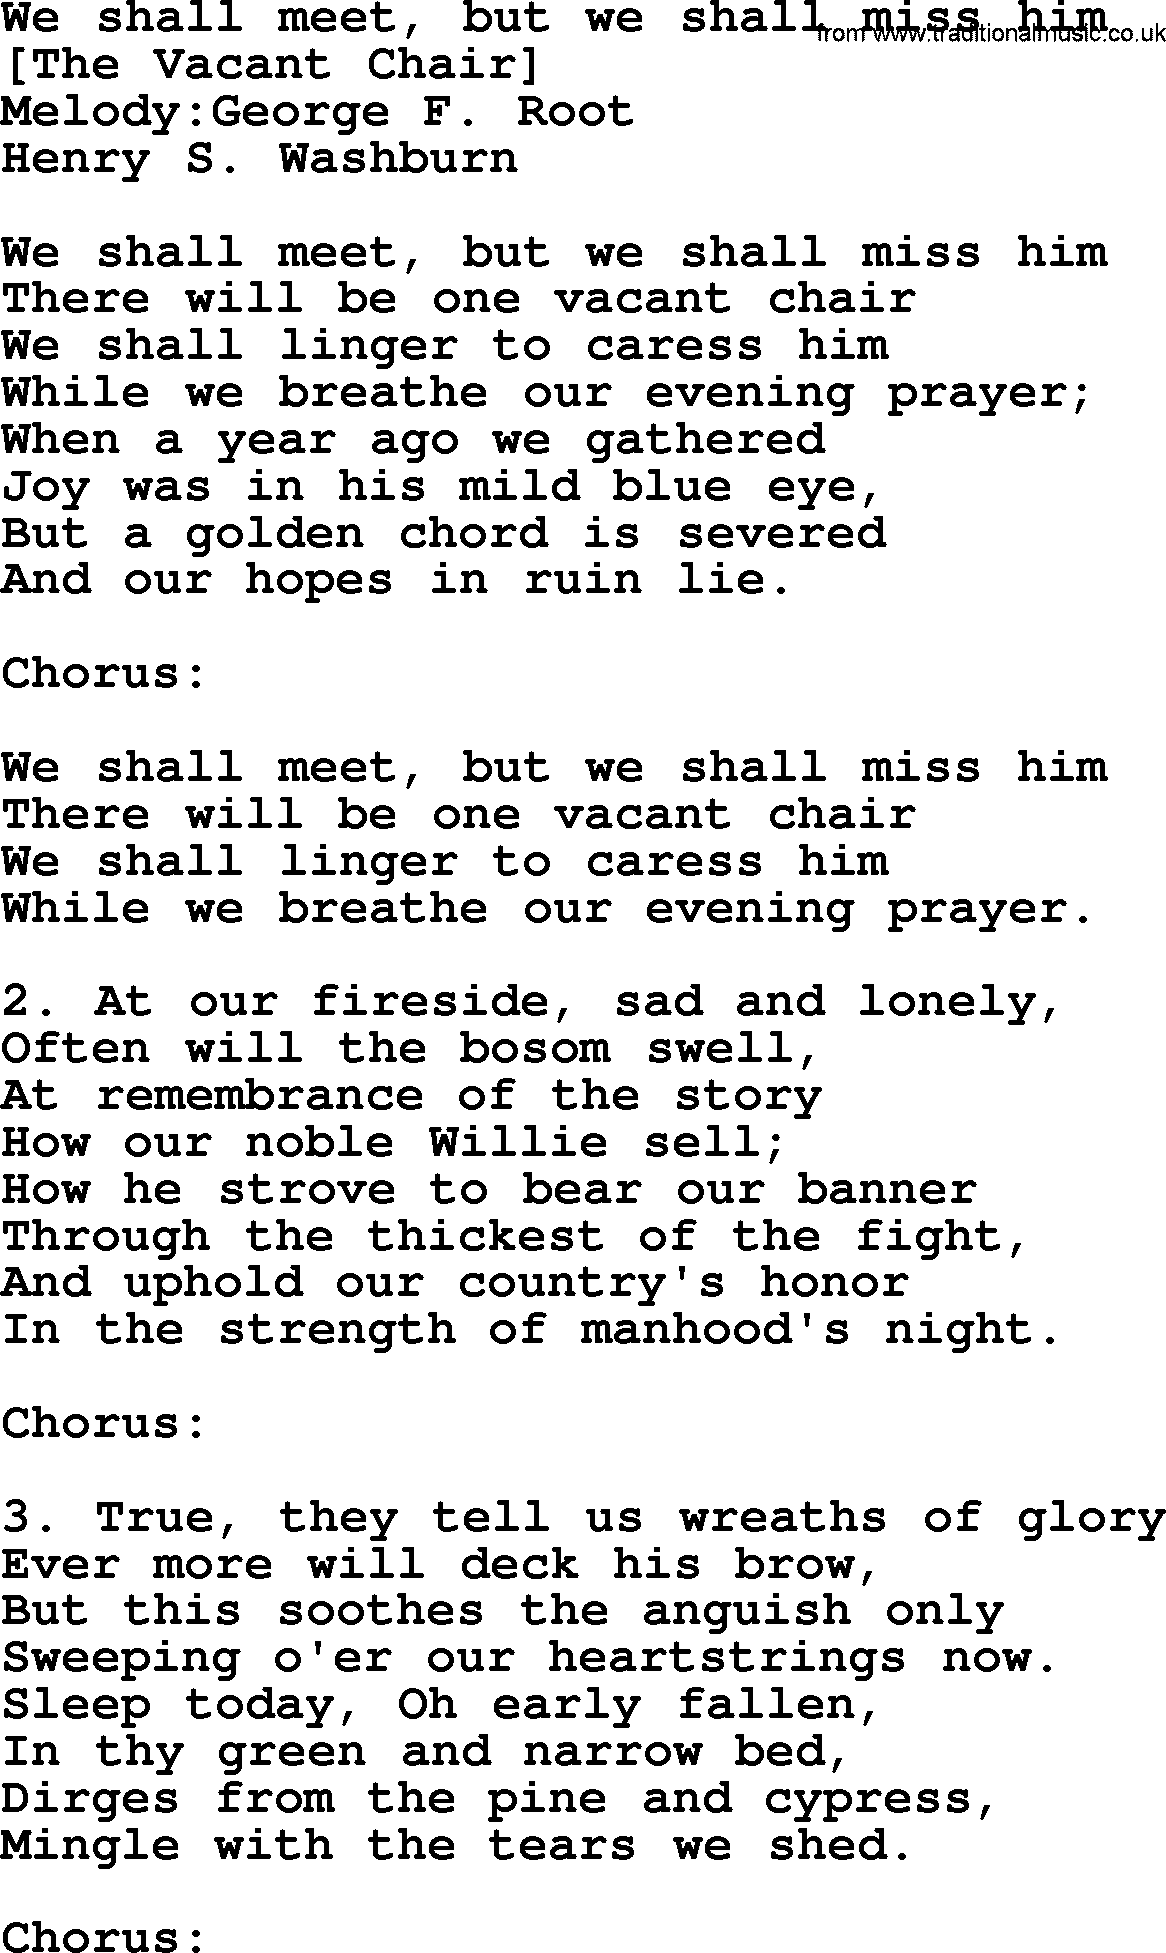 Old American Song: We Shall Meet, But We Shall Miss Him, lyrics